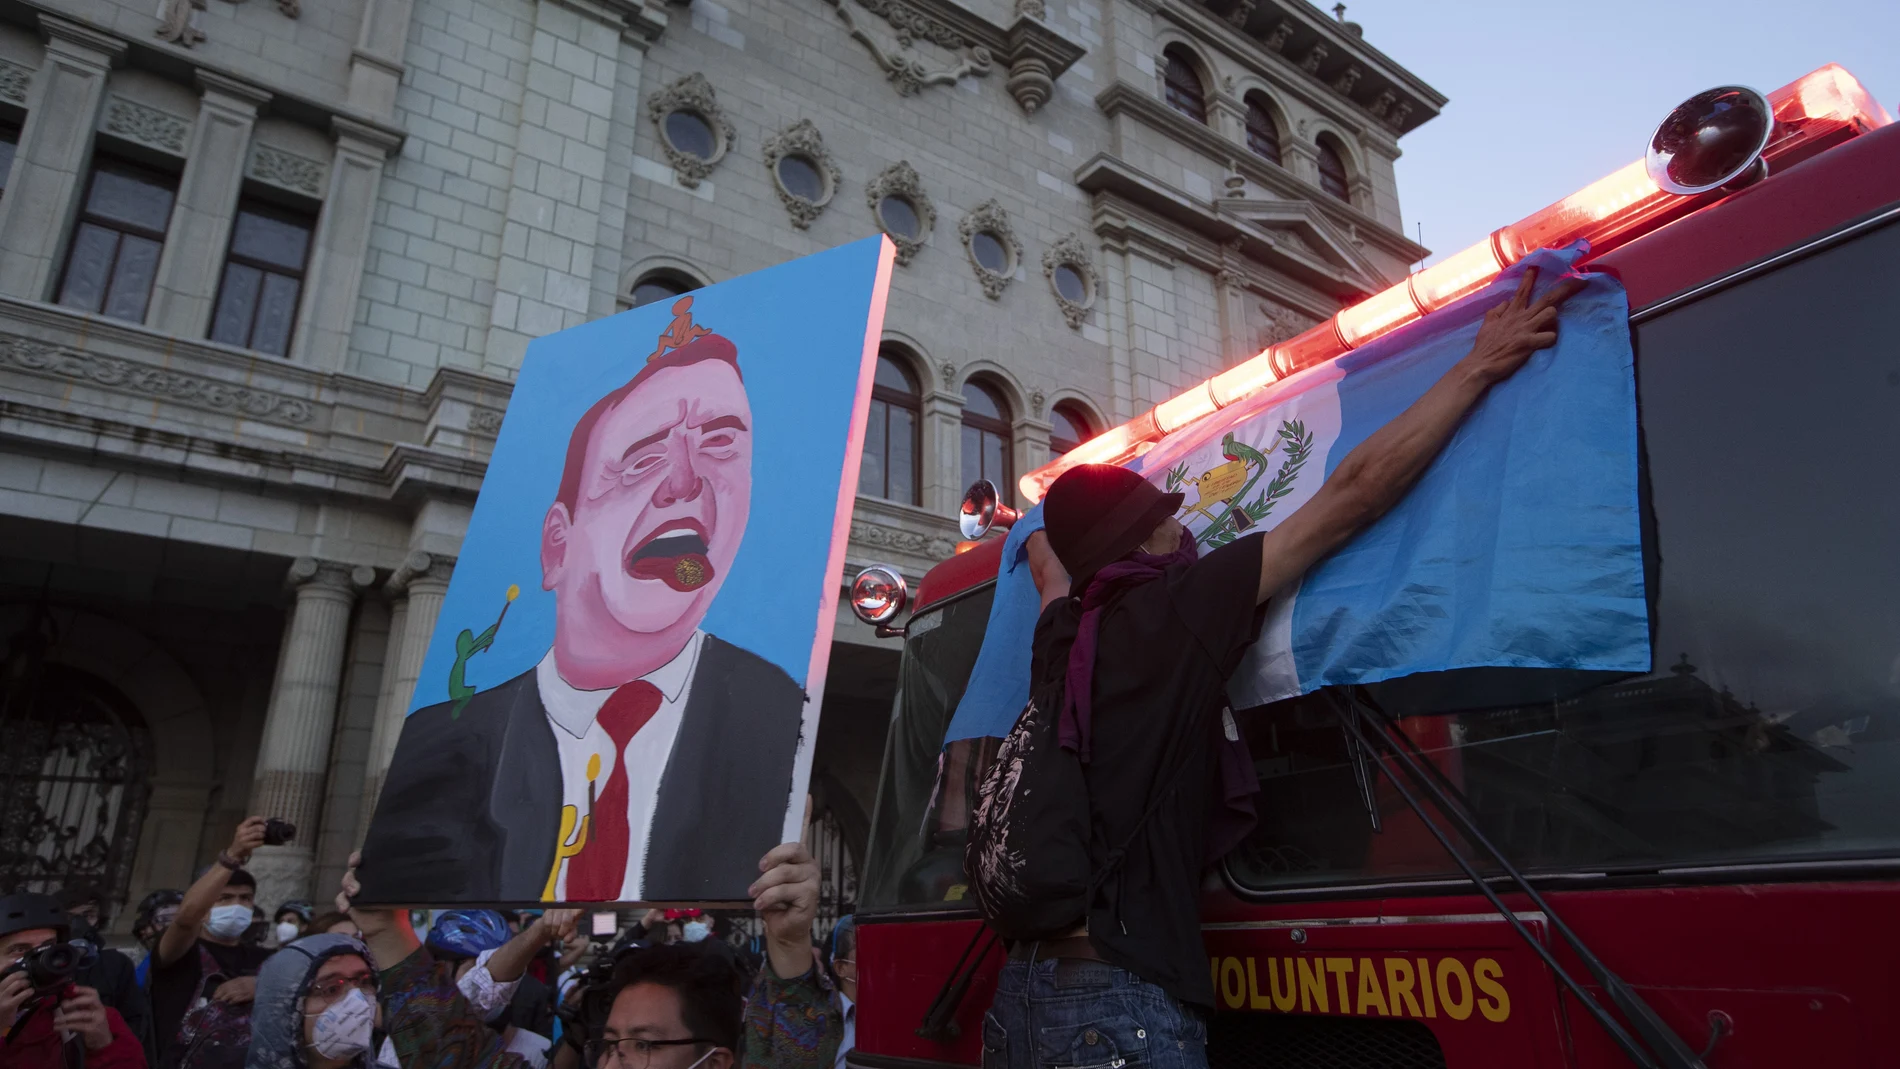 A protester holds up a painting depicting President Alejandro Giammattei during a protest demanding his resignation, in Guatemala City, Saturday, Nov. 28, 2020. Protests continue against Giammattei and the legislature for approving a budget that cut educational and health spending. Guatemala's Congress backed down on Monday on the proposed federal budget. (AP Photo/Moises Castillo)